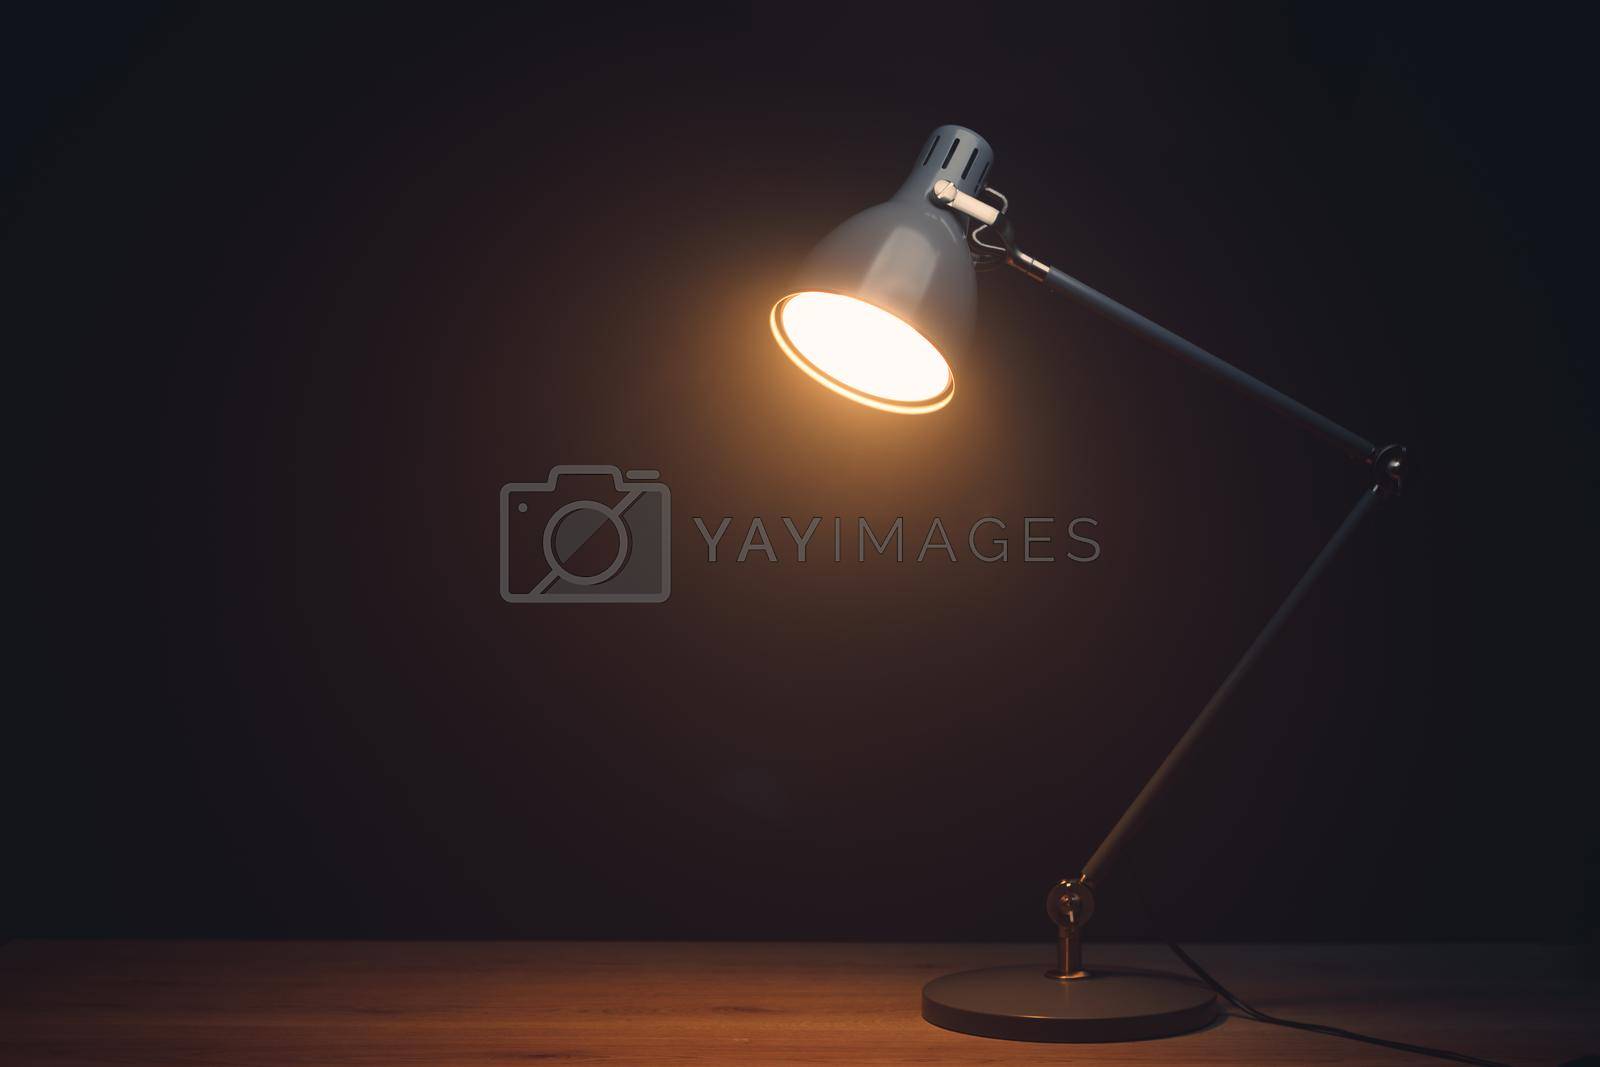 Royalty free image of desk lamp in mist, black background with copy-space by nikkytok